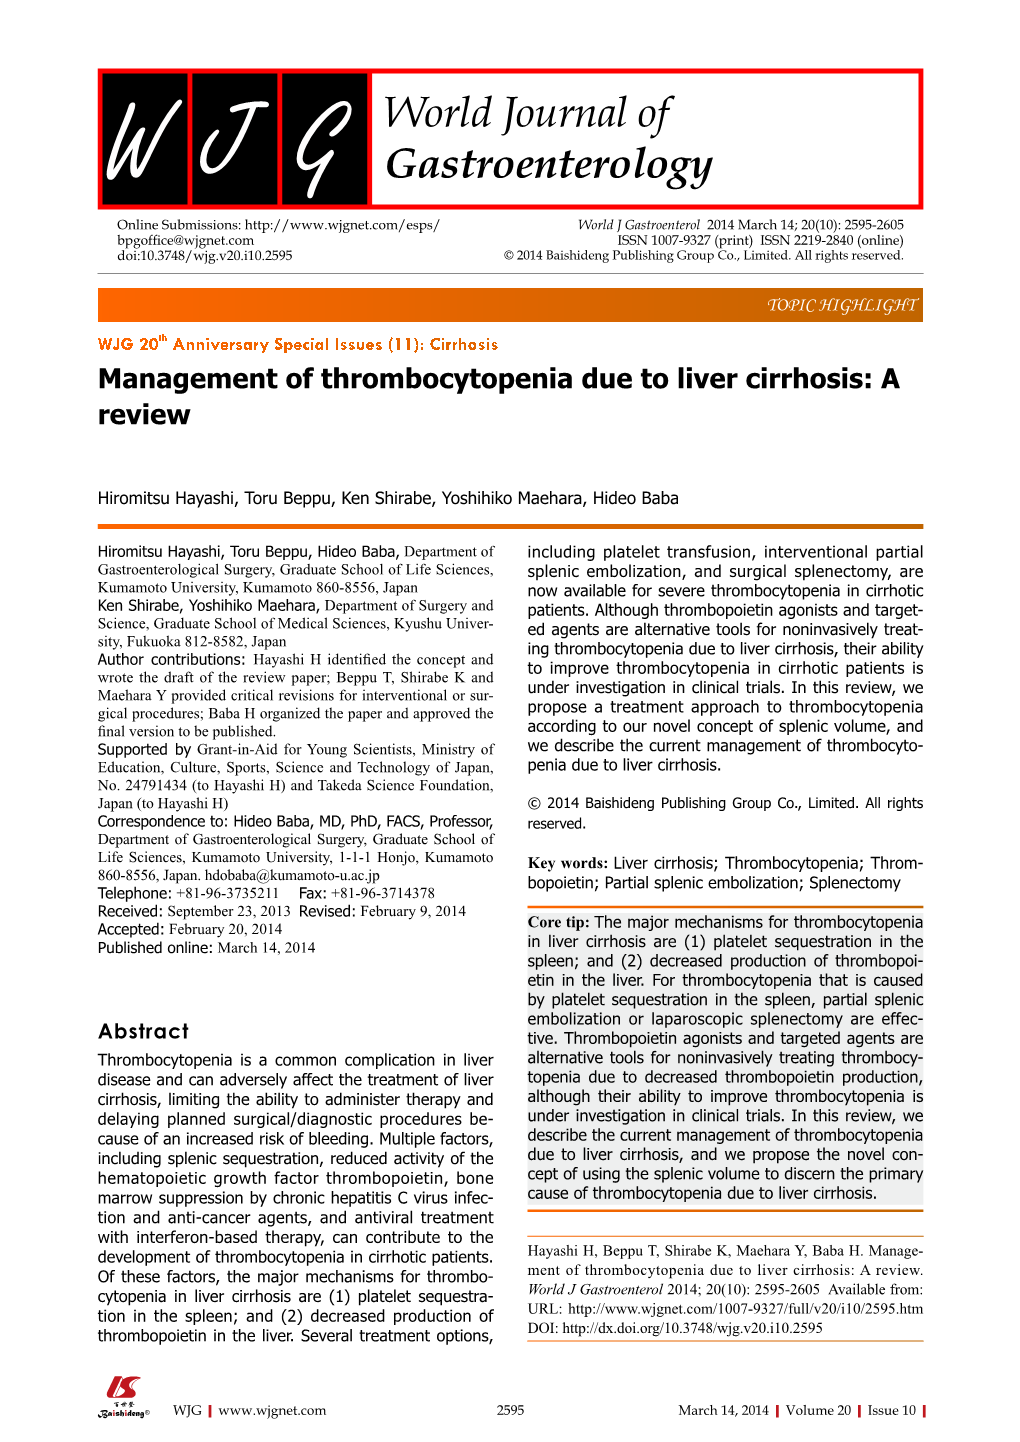 Management of Thrombocytopenia Due to Liver Cirrhosis: a Review